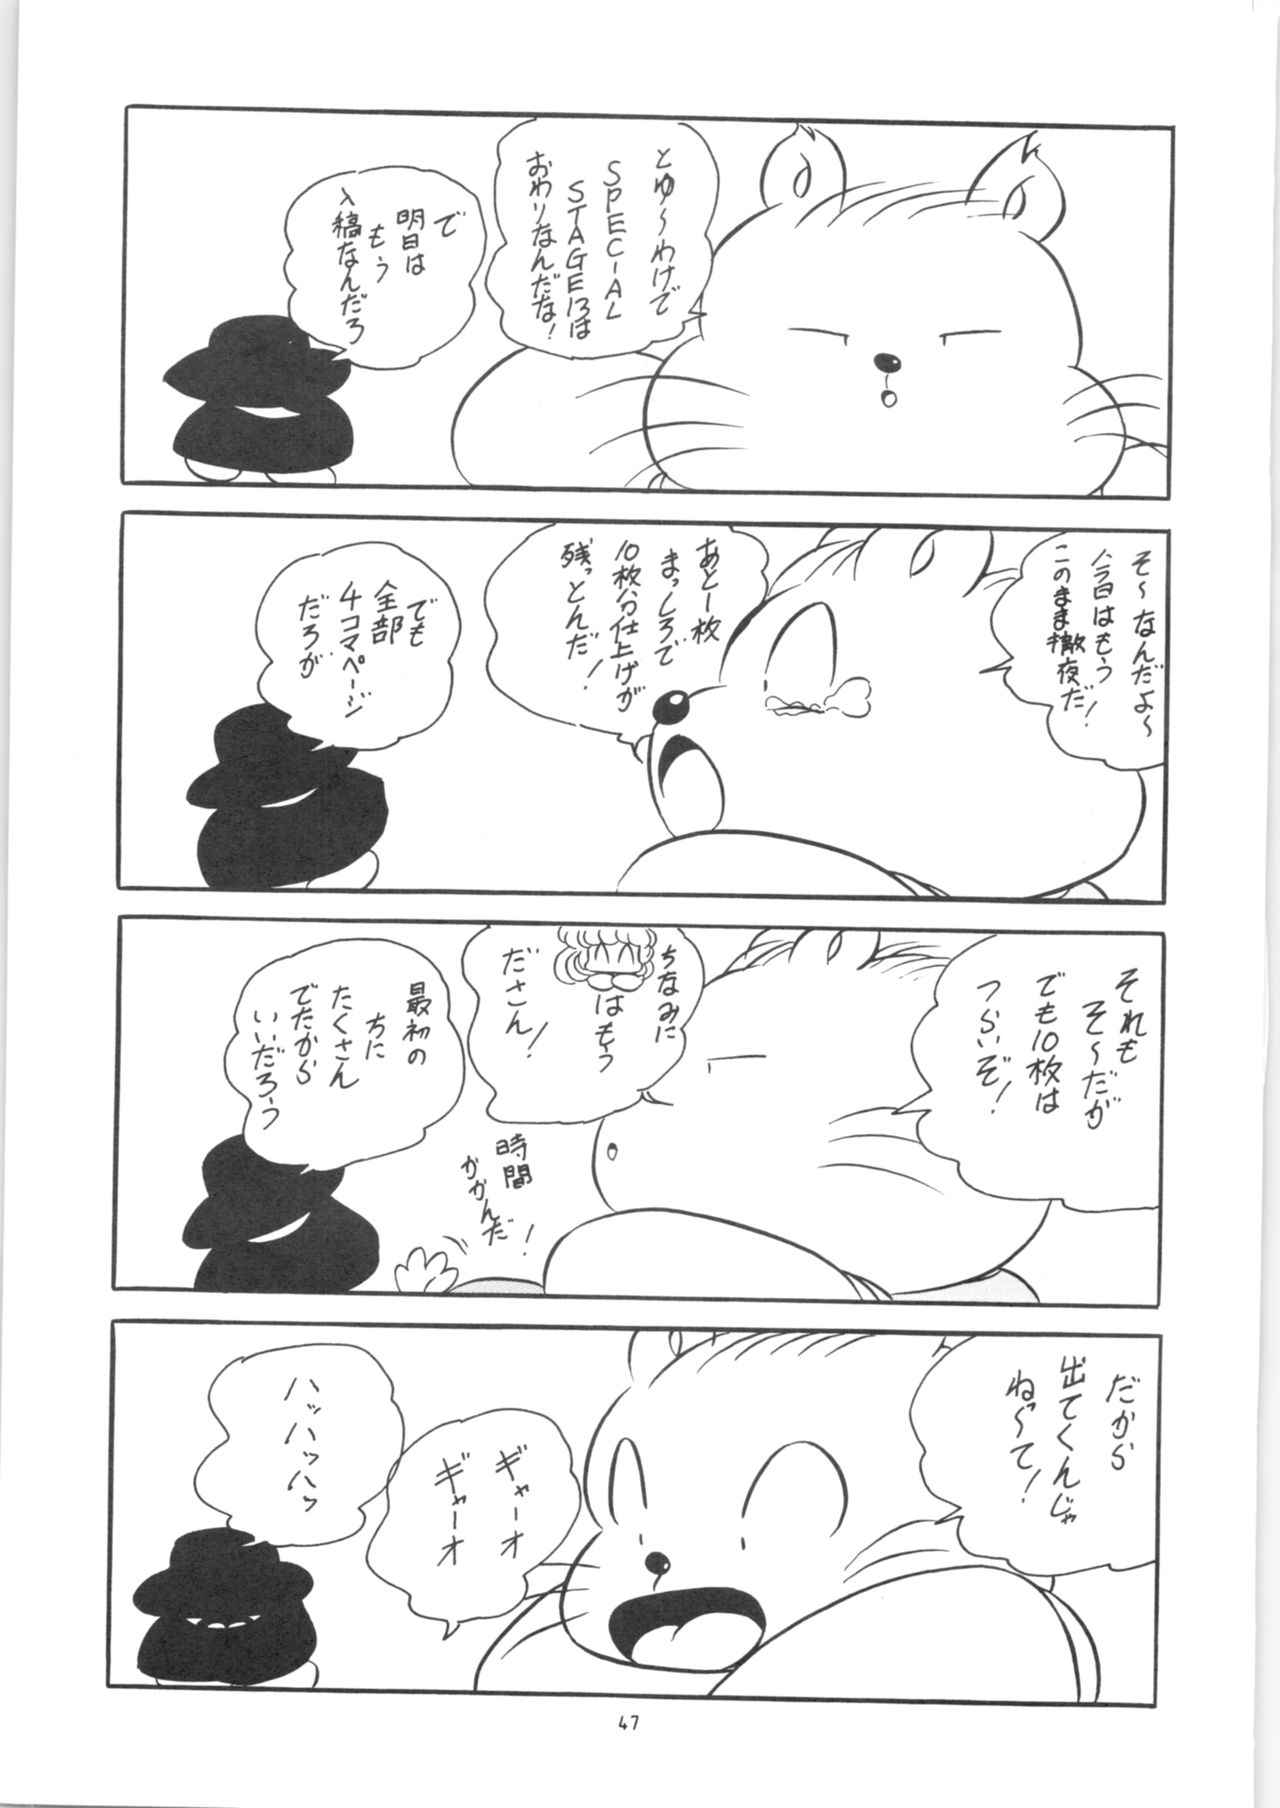 [C-COMPANY] C-COMPANY SPECIAL STAGE 13 (Ranma 1/2) page 48 full